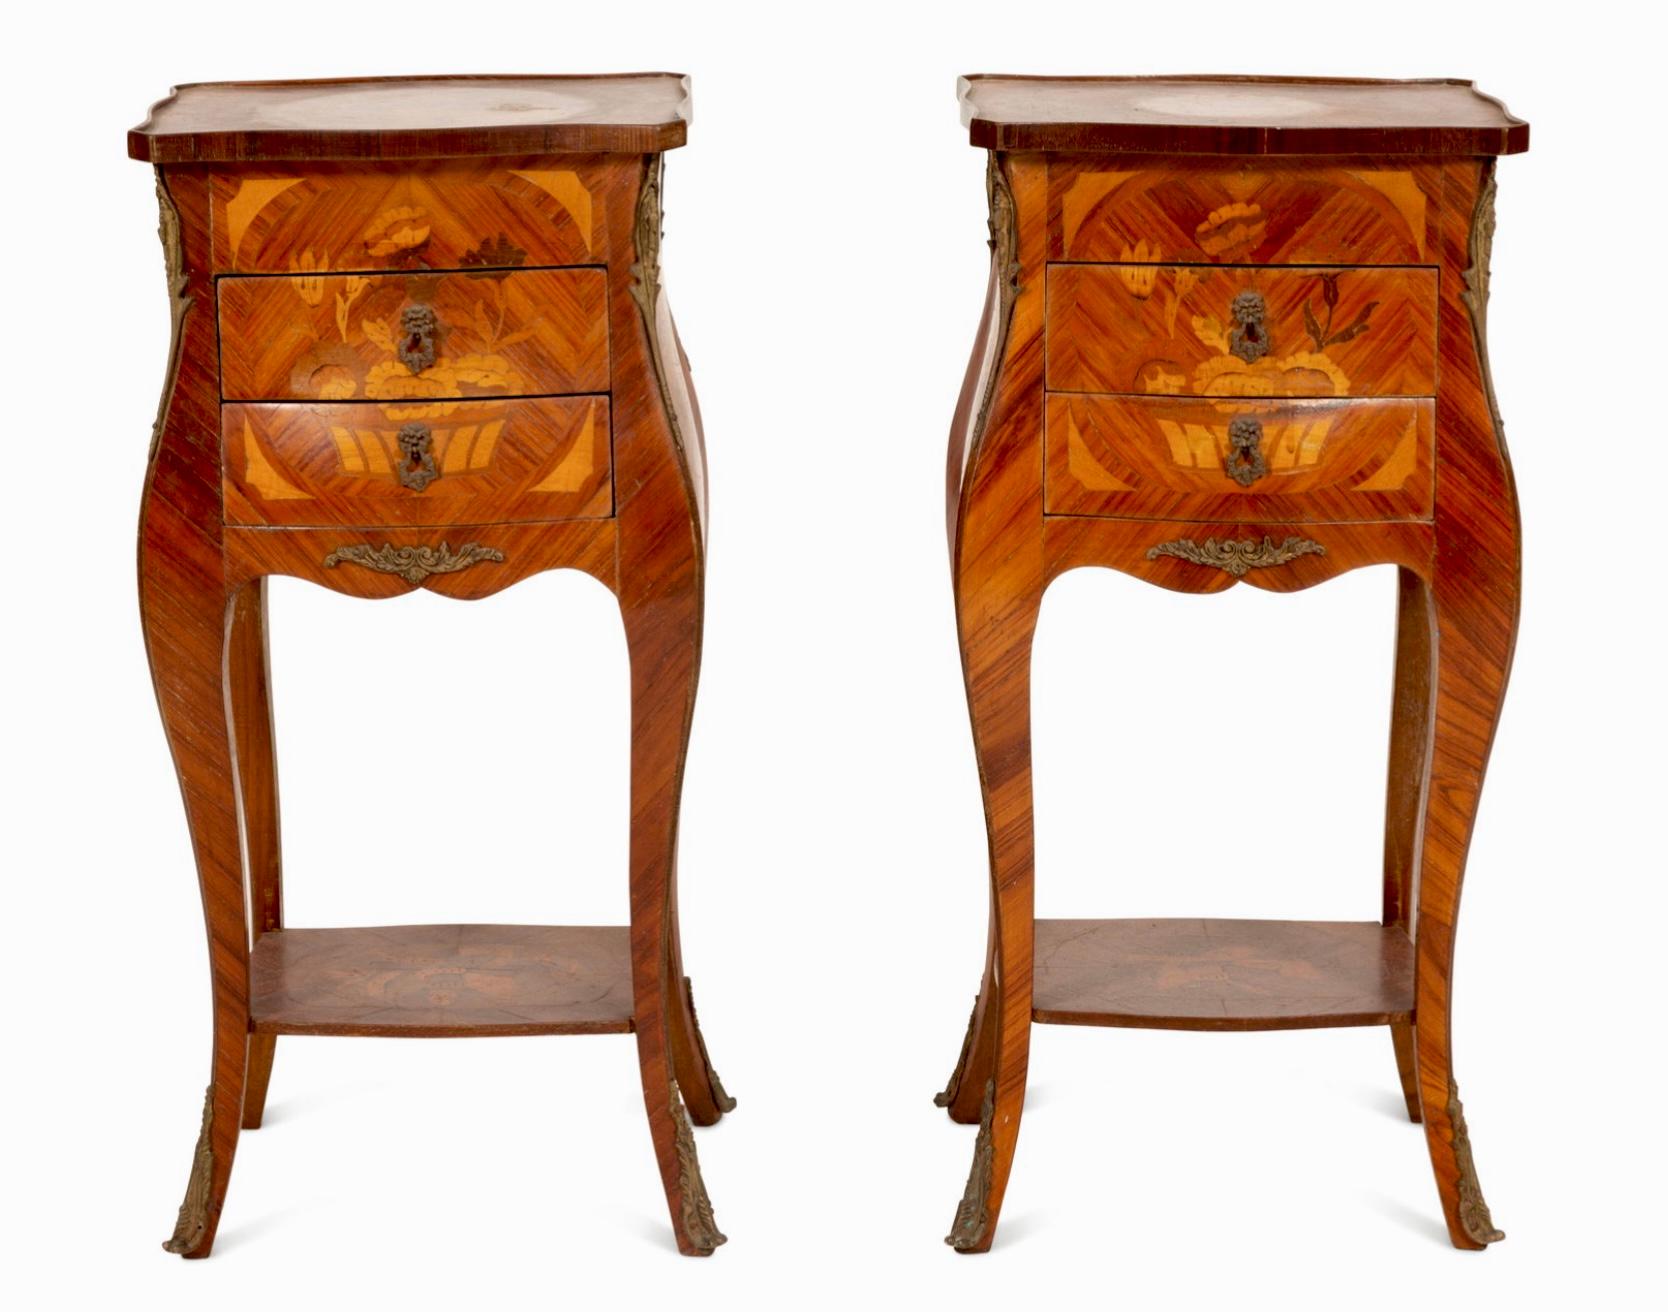 Pair of Marquetry Side Tables with Gilt Metal Mounts In Good Condition For Sale In Bradenton, FL